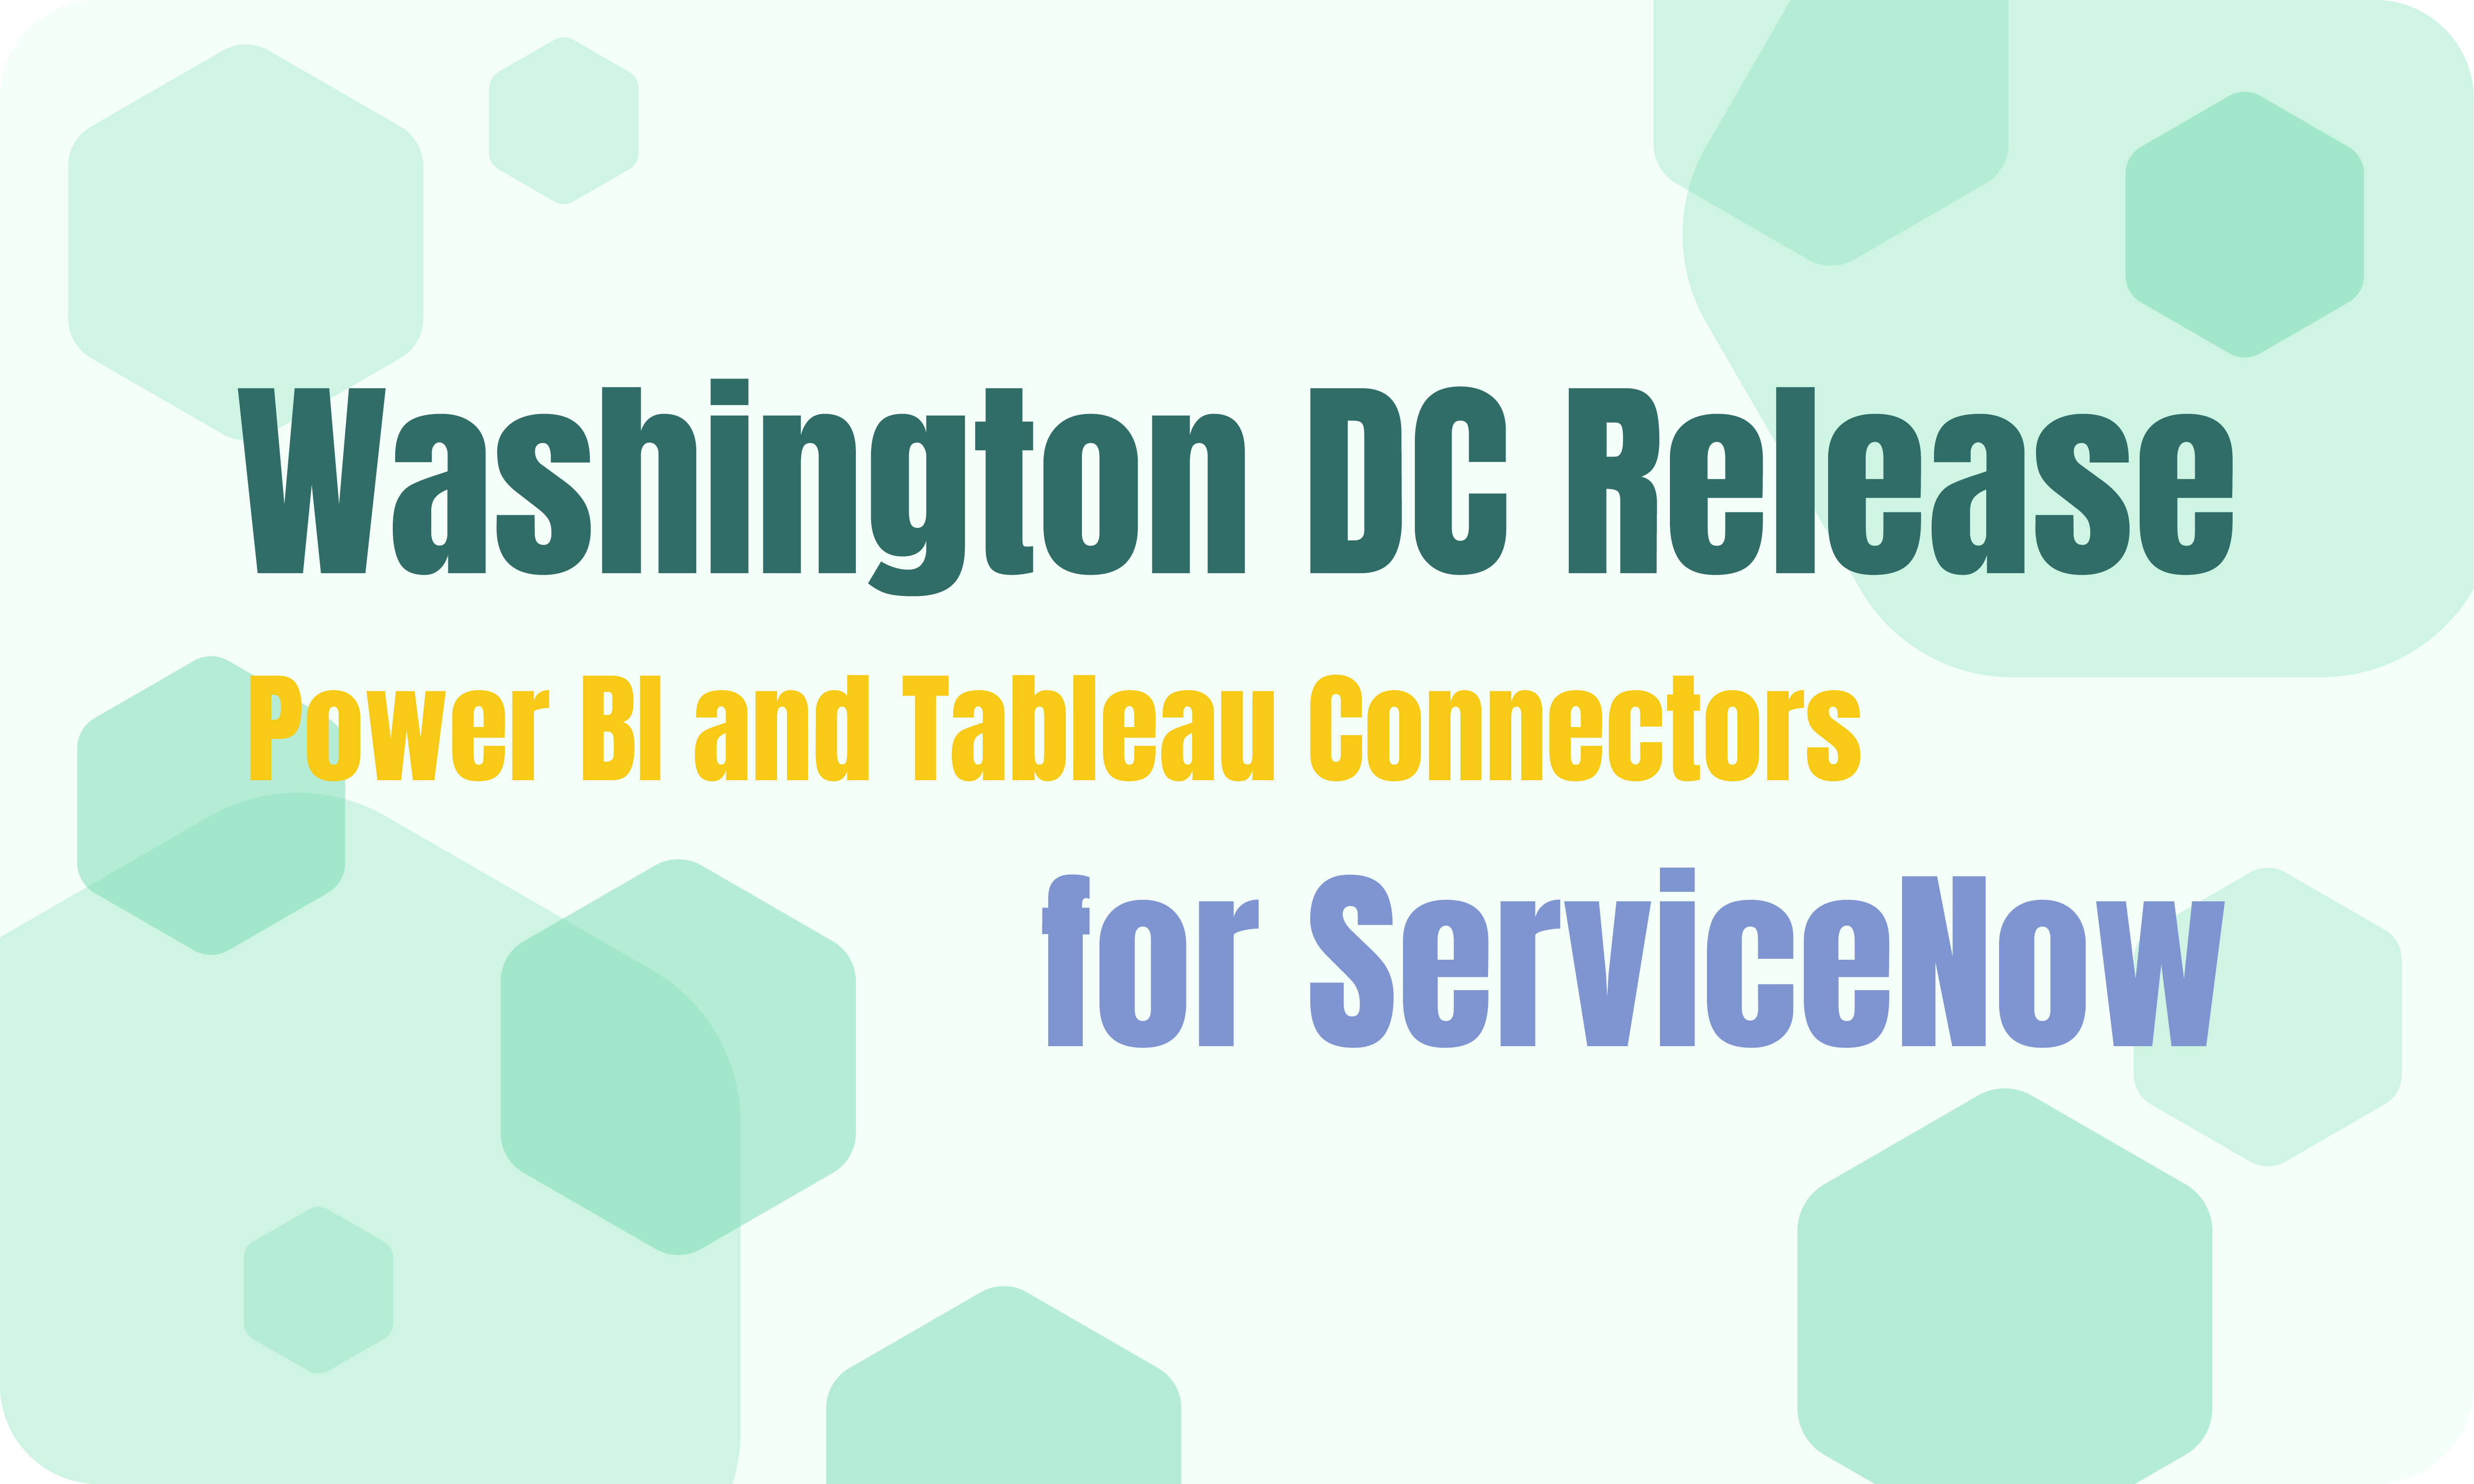 Power BI and Tableau Connectors for ServiceNow Now Support Washington DC Release 